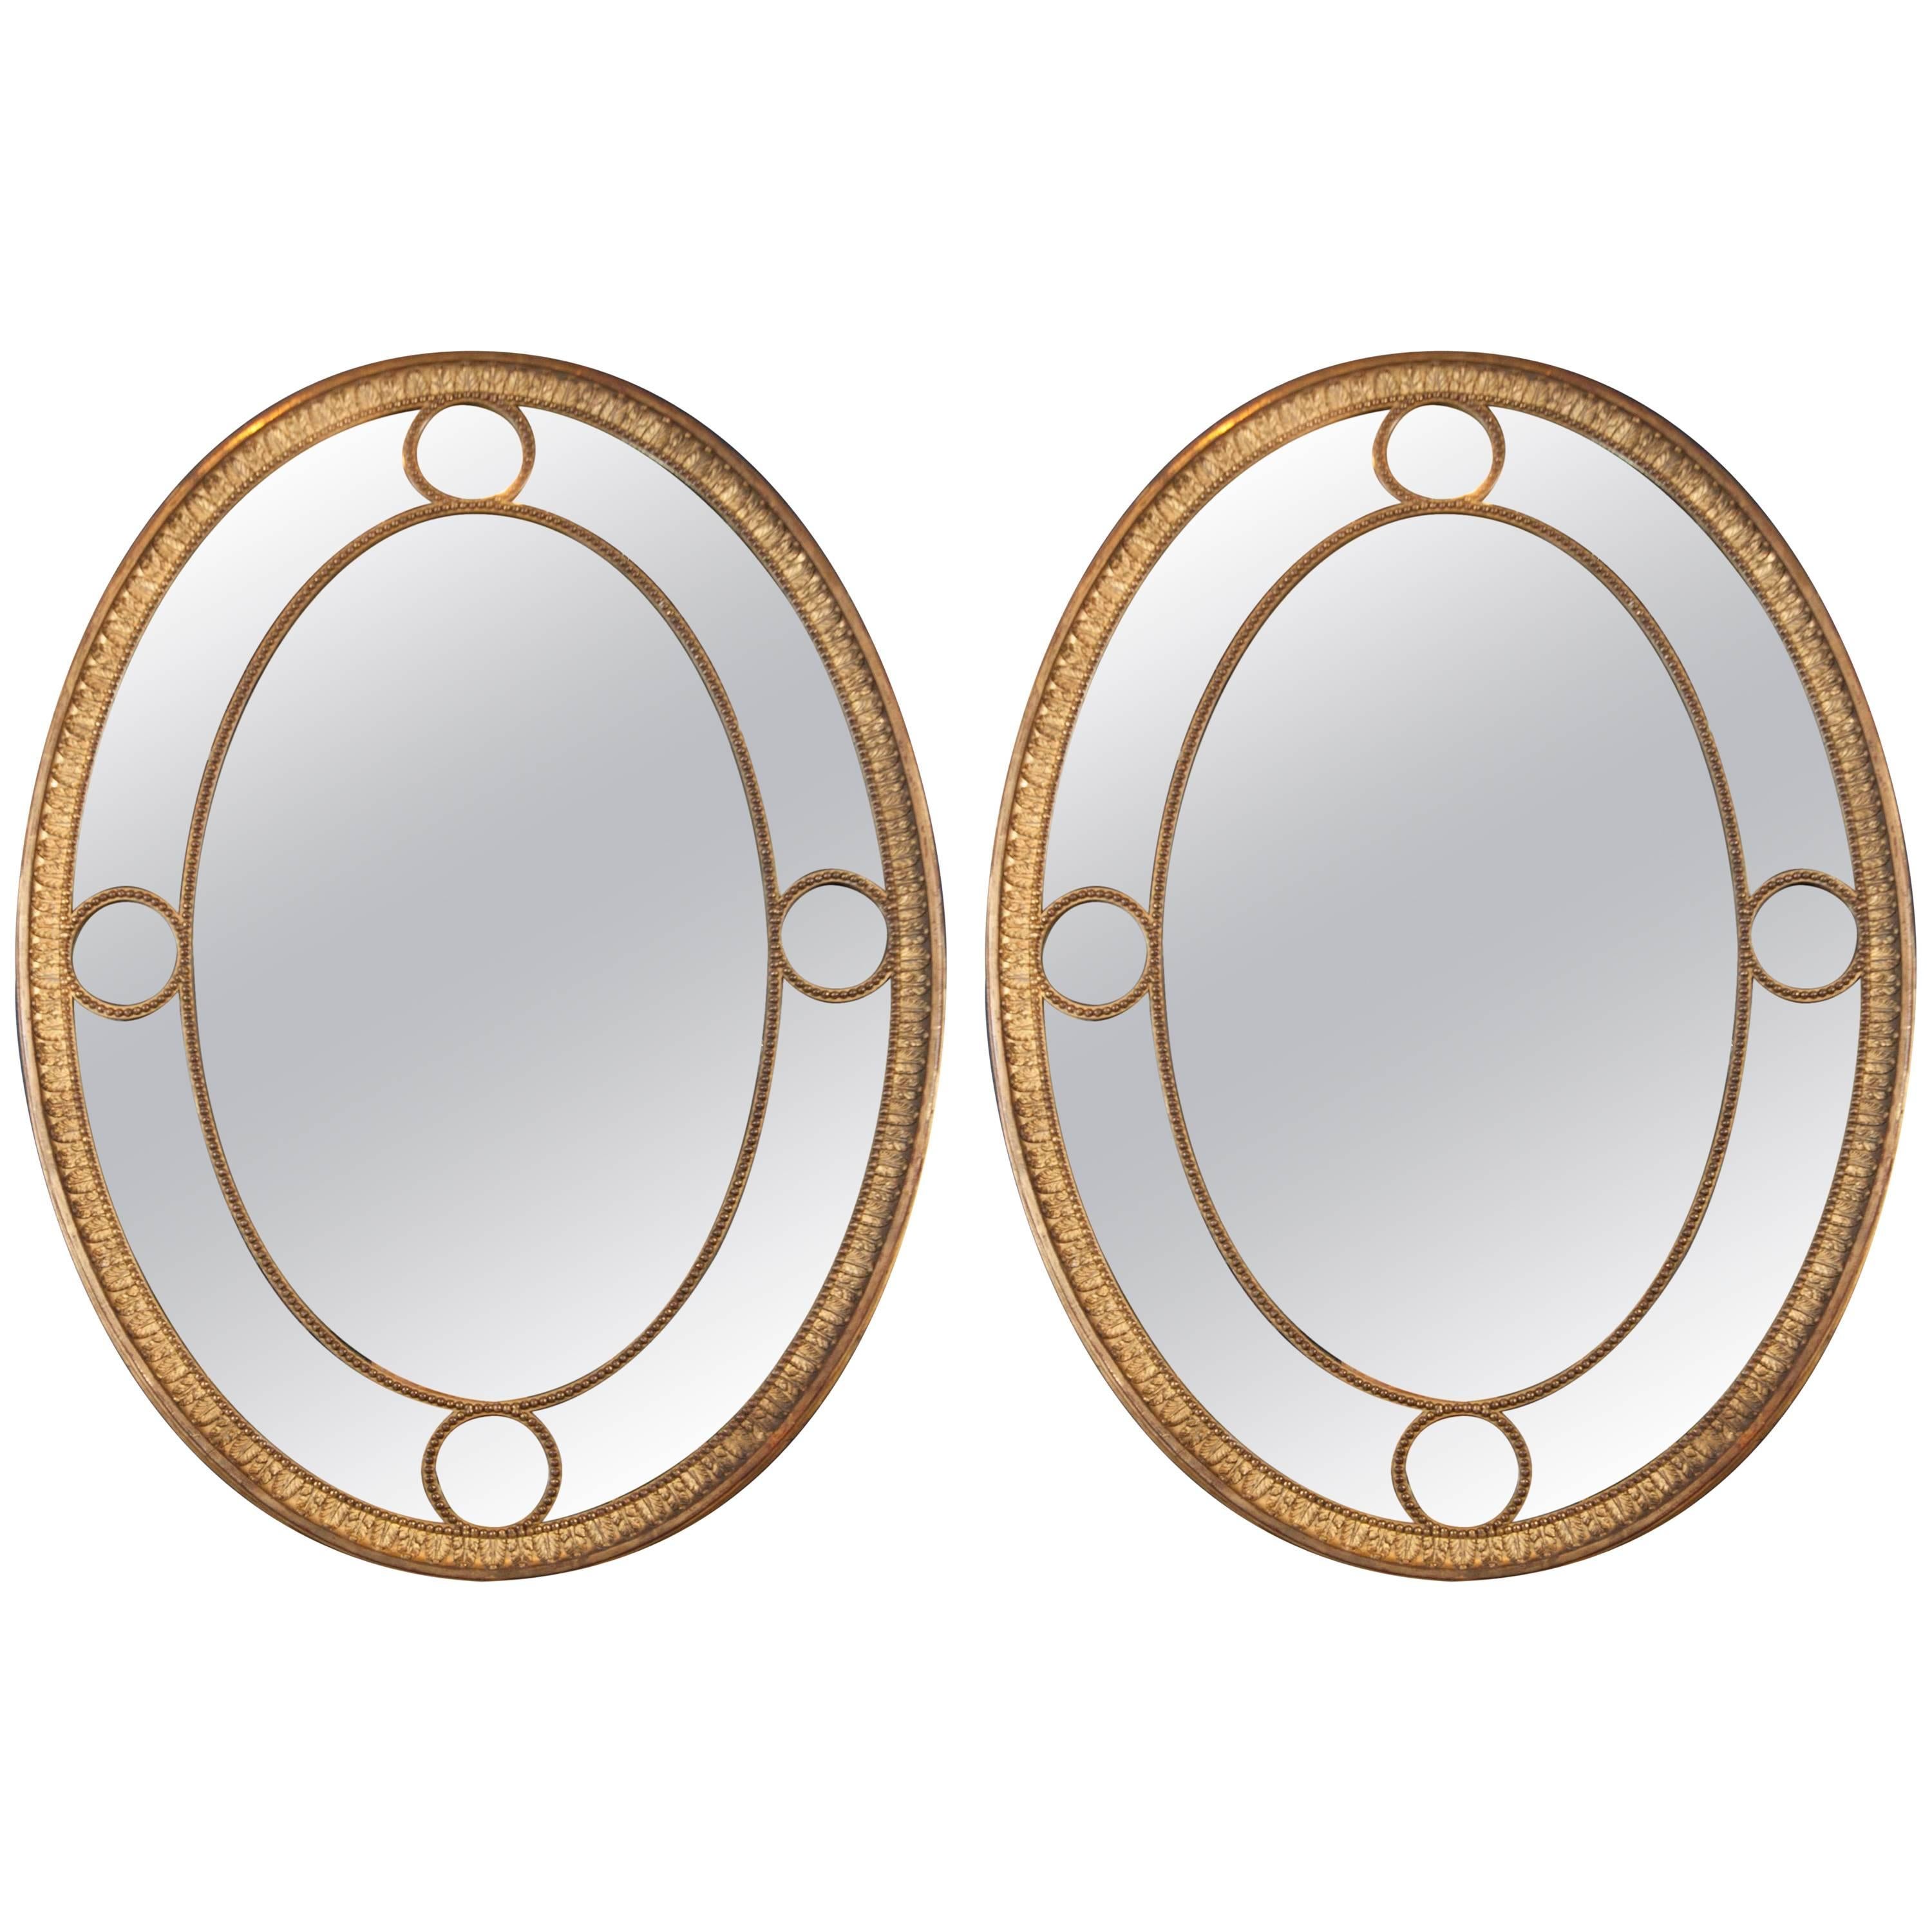 Pair of English Oval Giltwood Mirrors